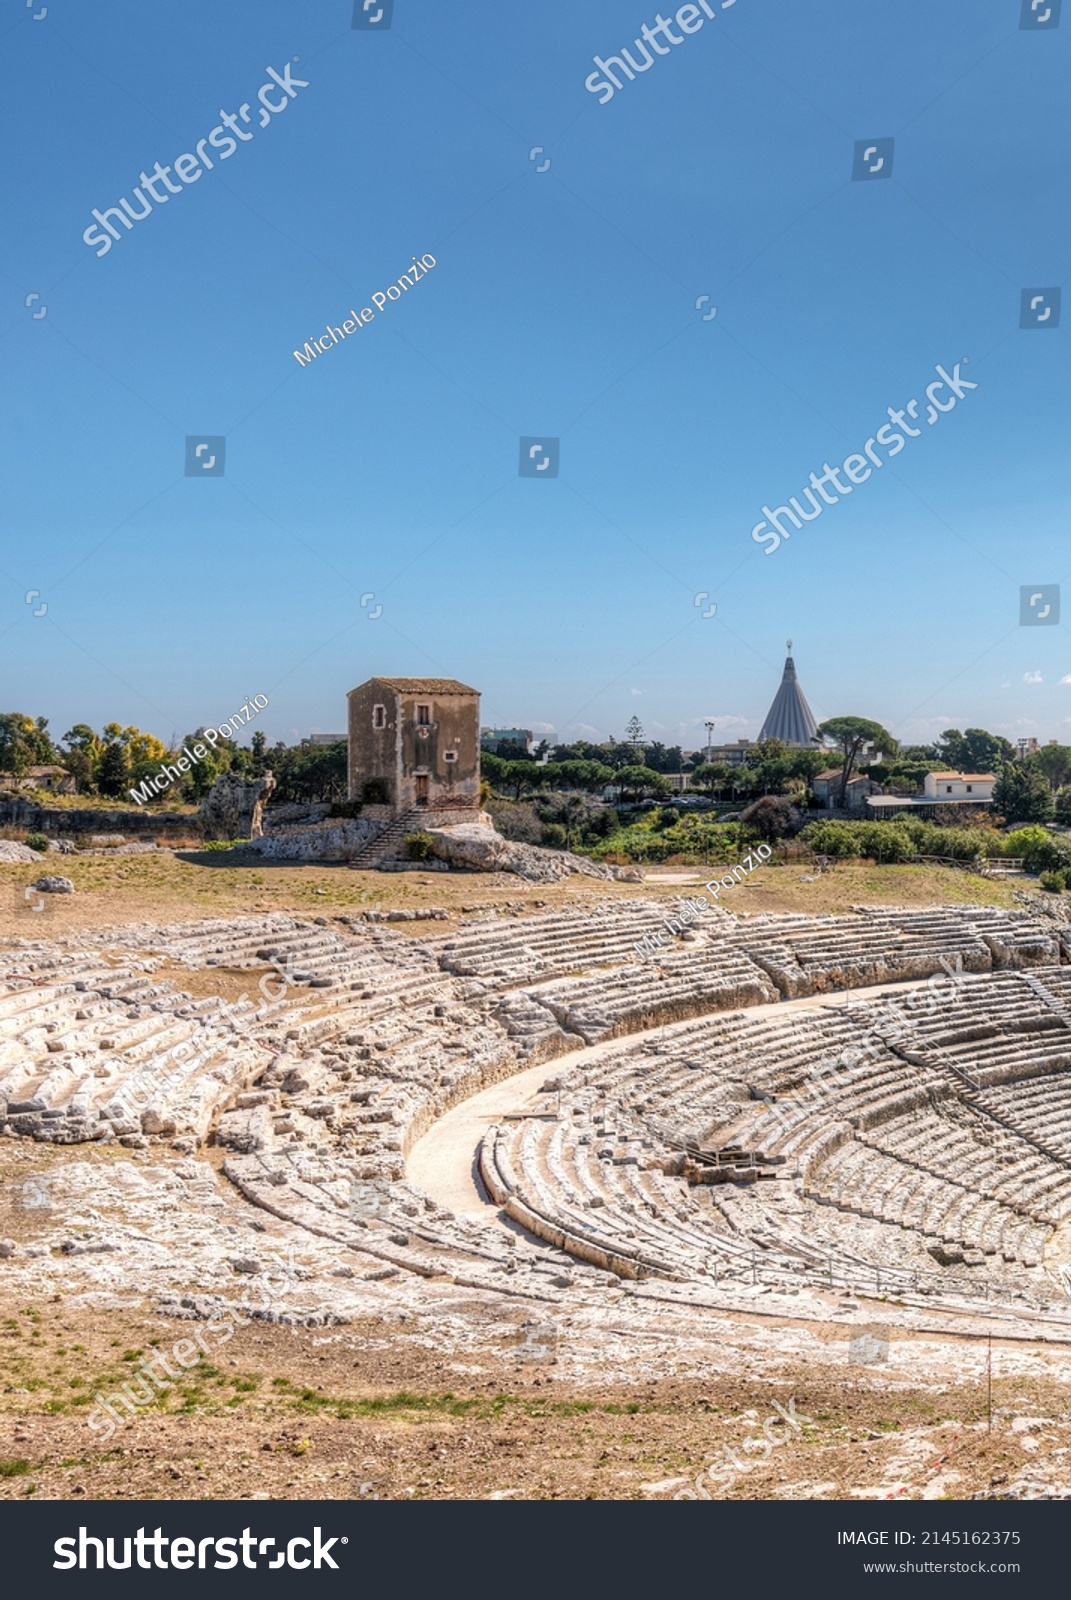 The miller's house inside the archaeological park of Neapolis in Syracuse Sicily and part of the famous Greek theater. #2145162375